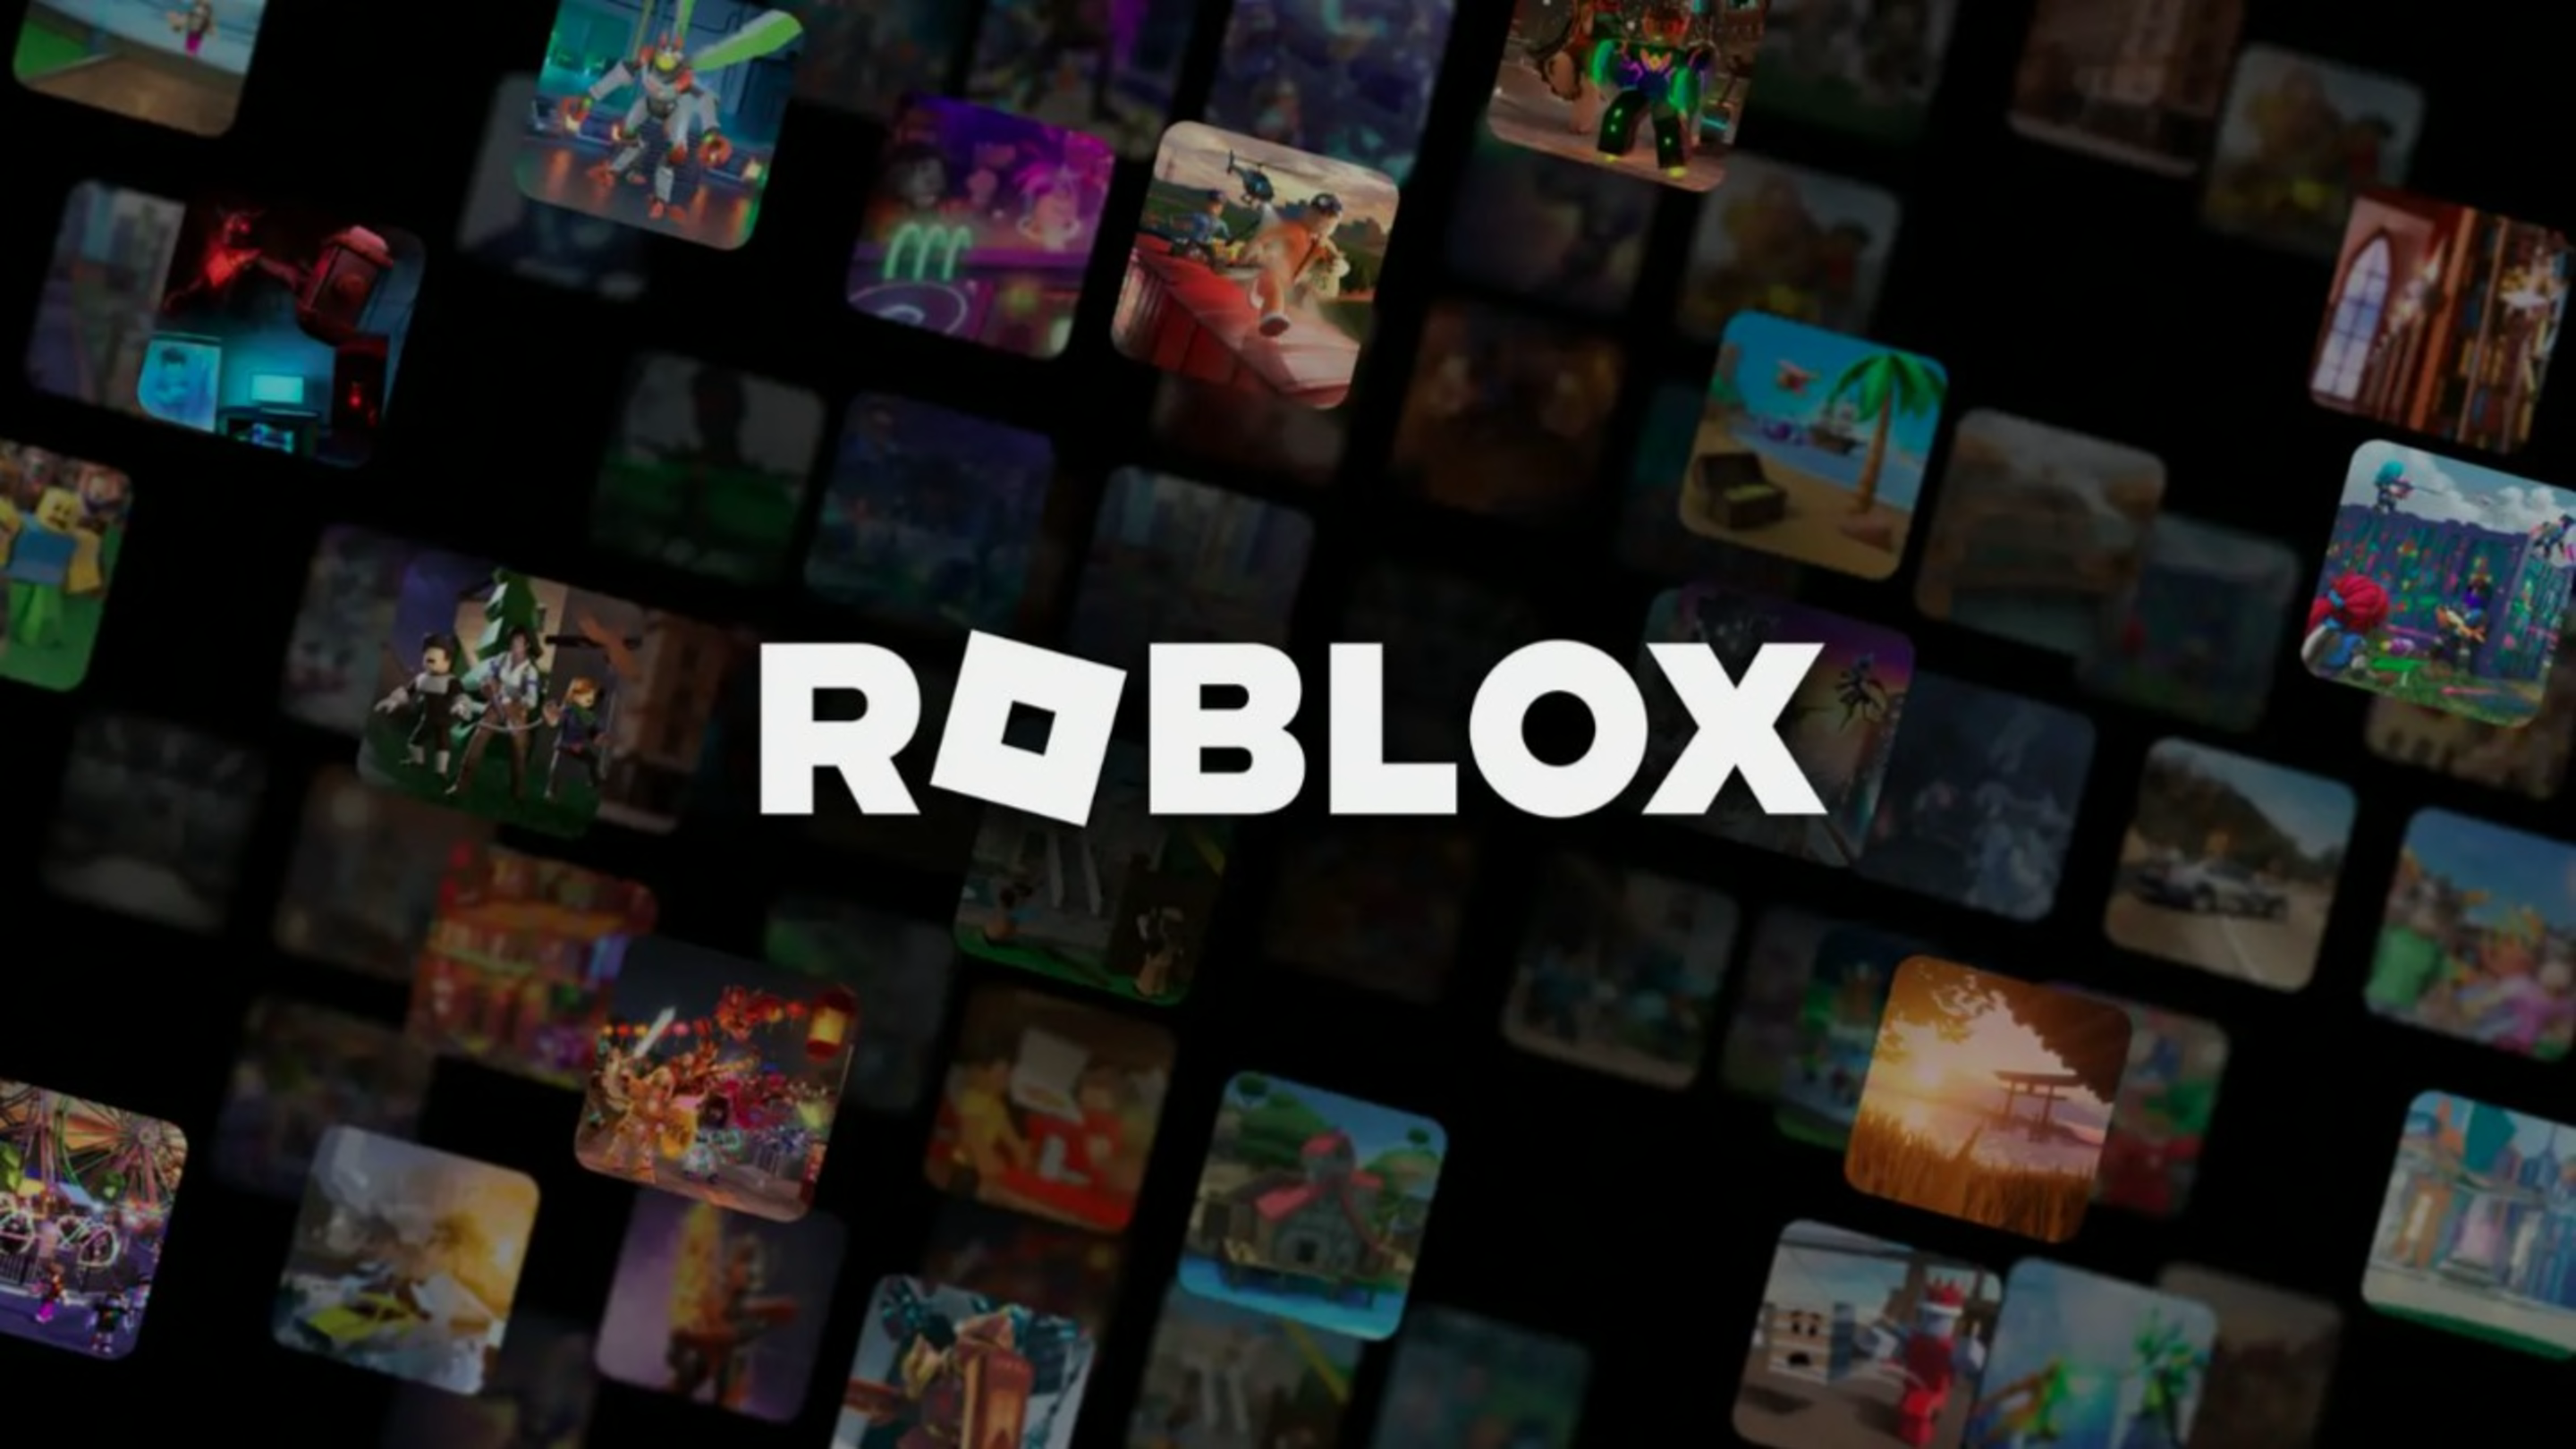 IShowSpeed accidentally spends £124,000 on rare Roblox fedora